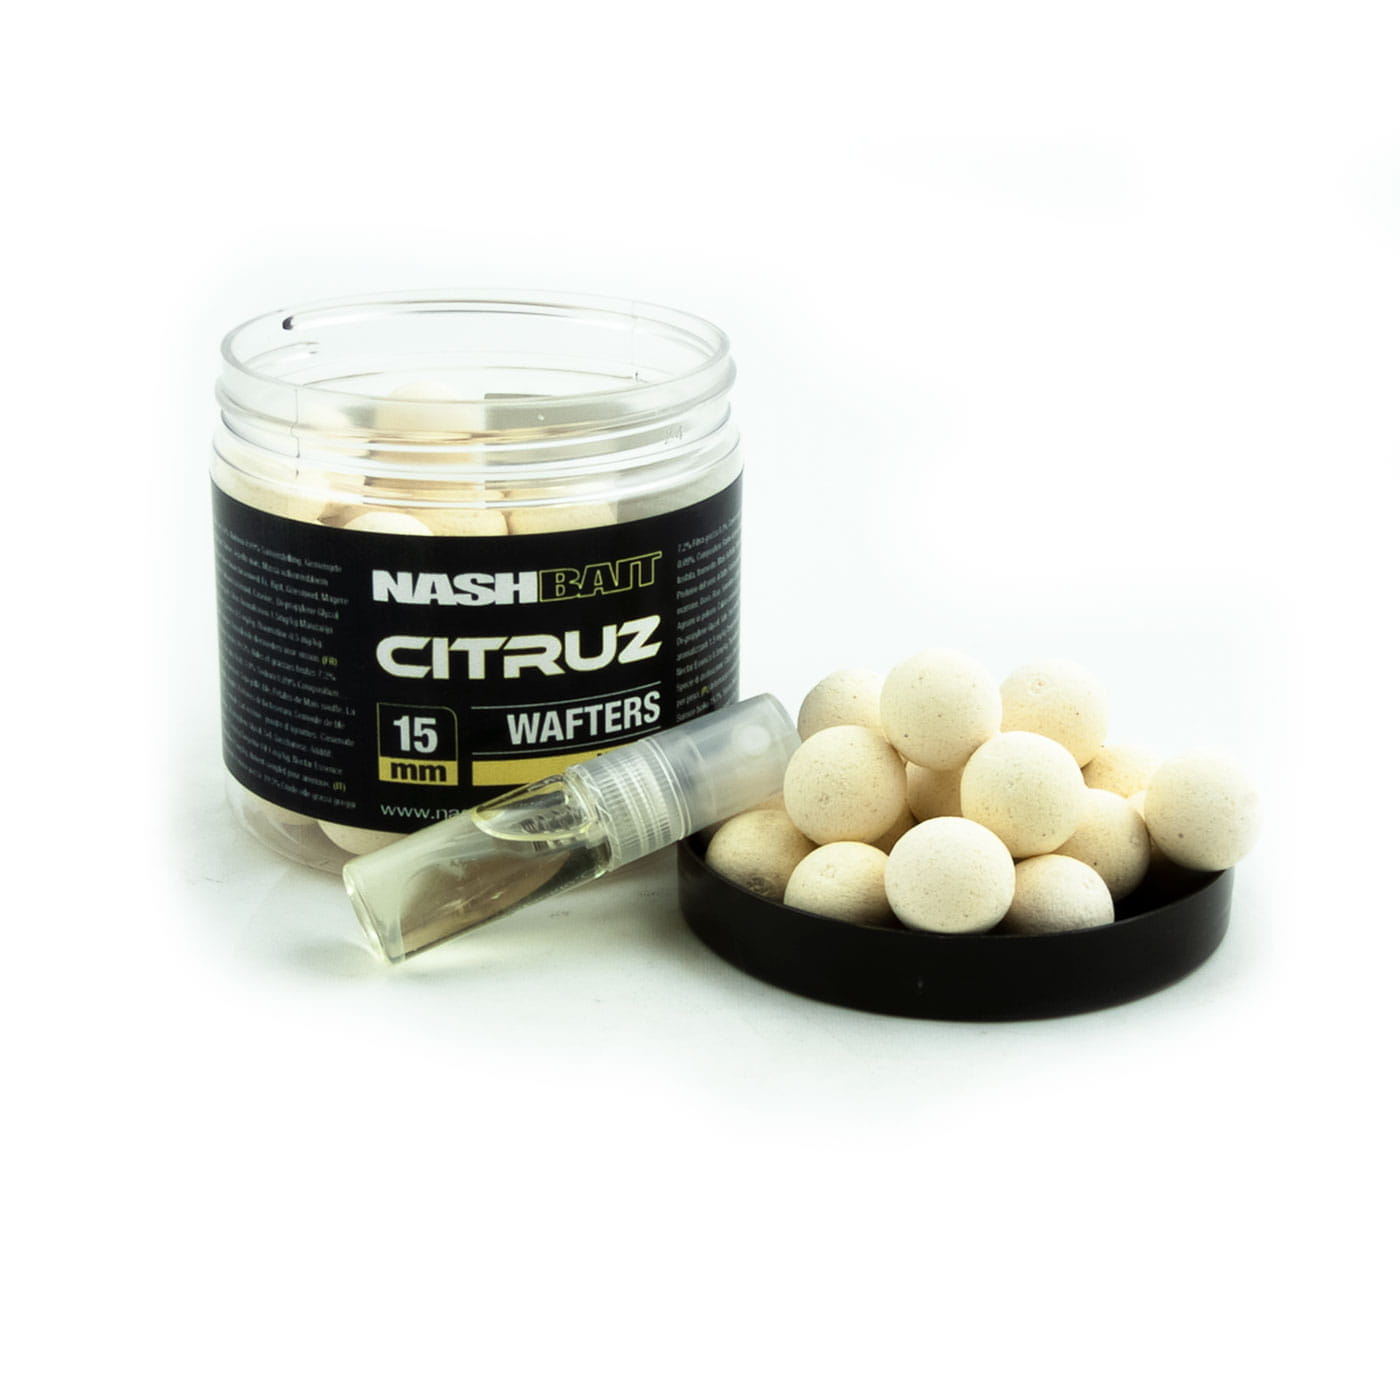 Citruz White Wafters